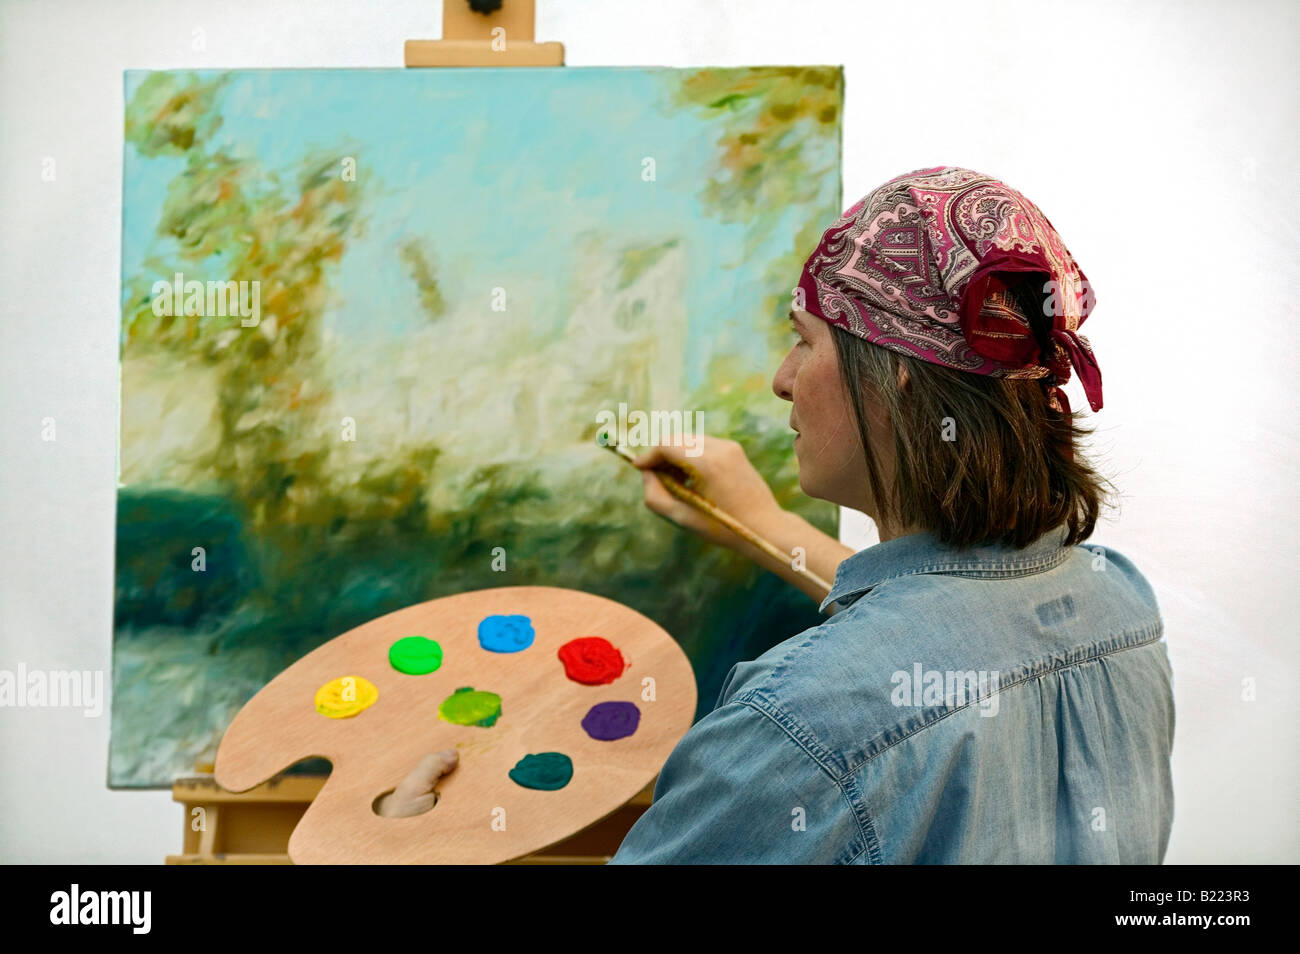 artist is painting Stock Photo